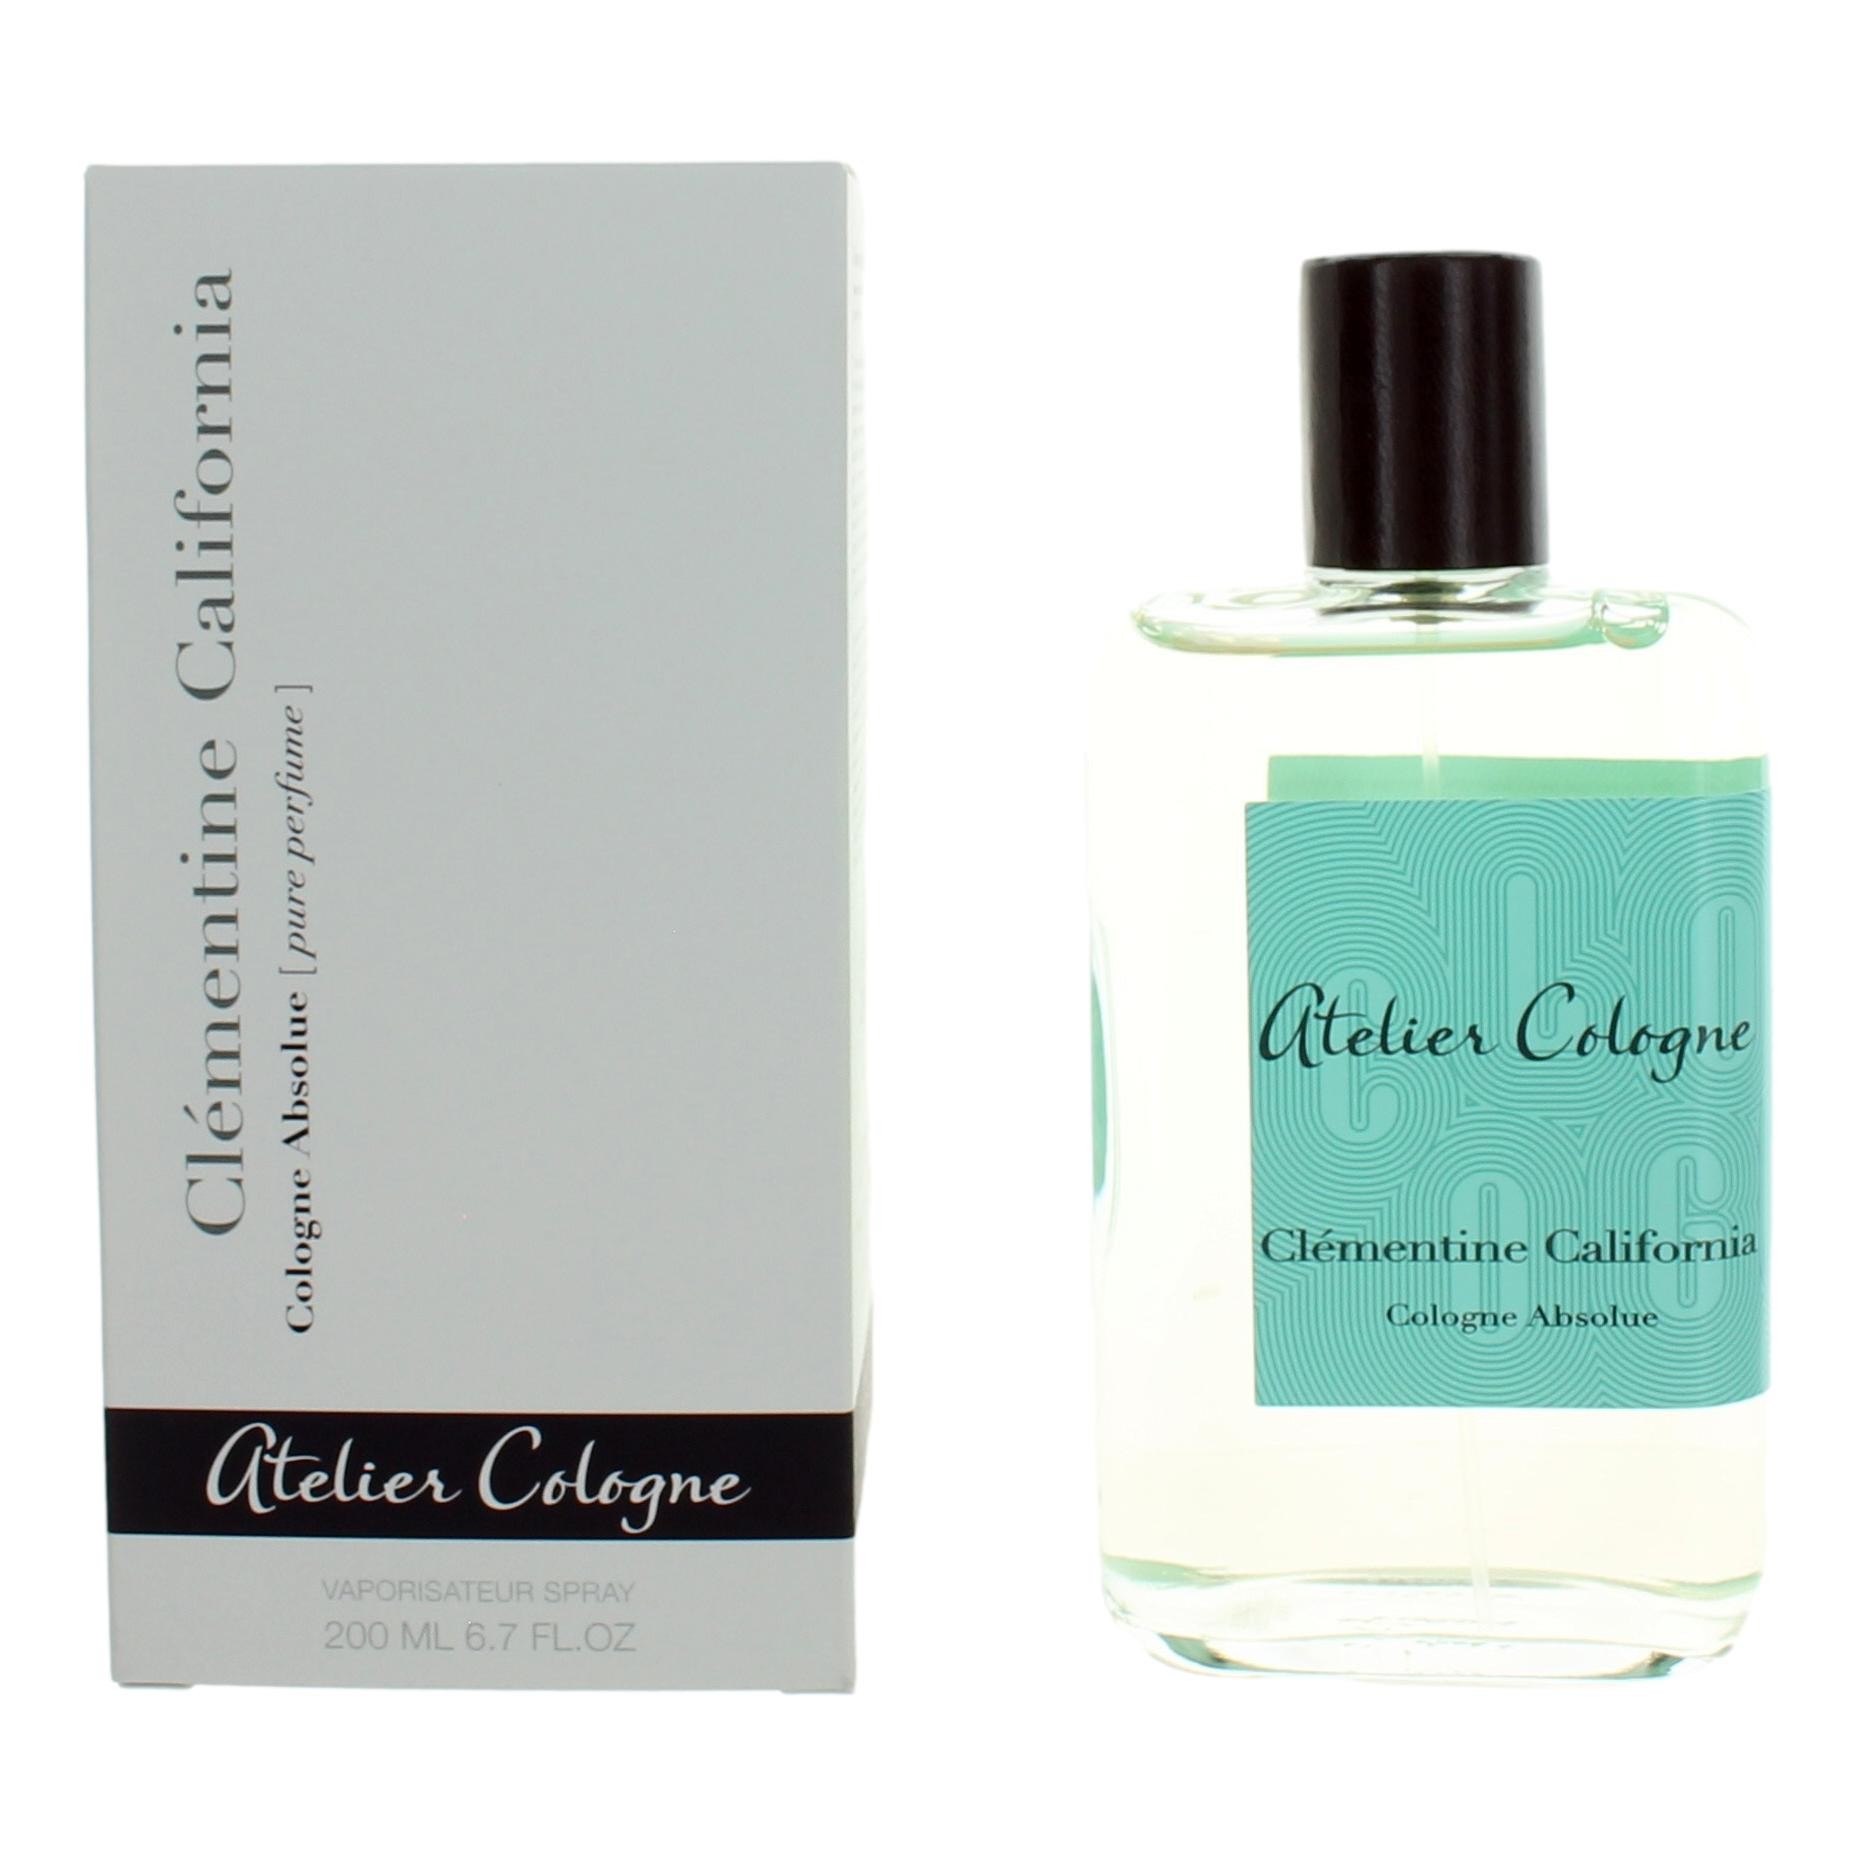 Atelier Cologne Clementine California by Atelier Cologne, 6.7 oz Cologne Absolue Spray for Unisex